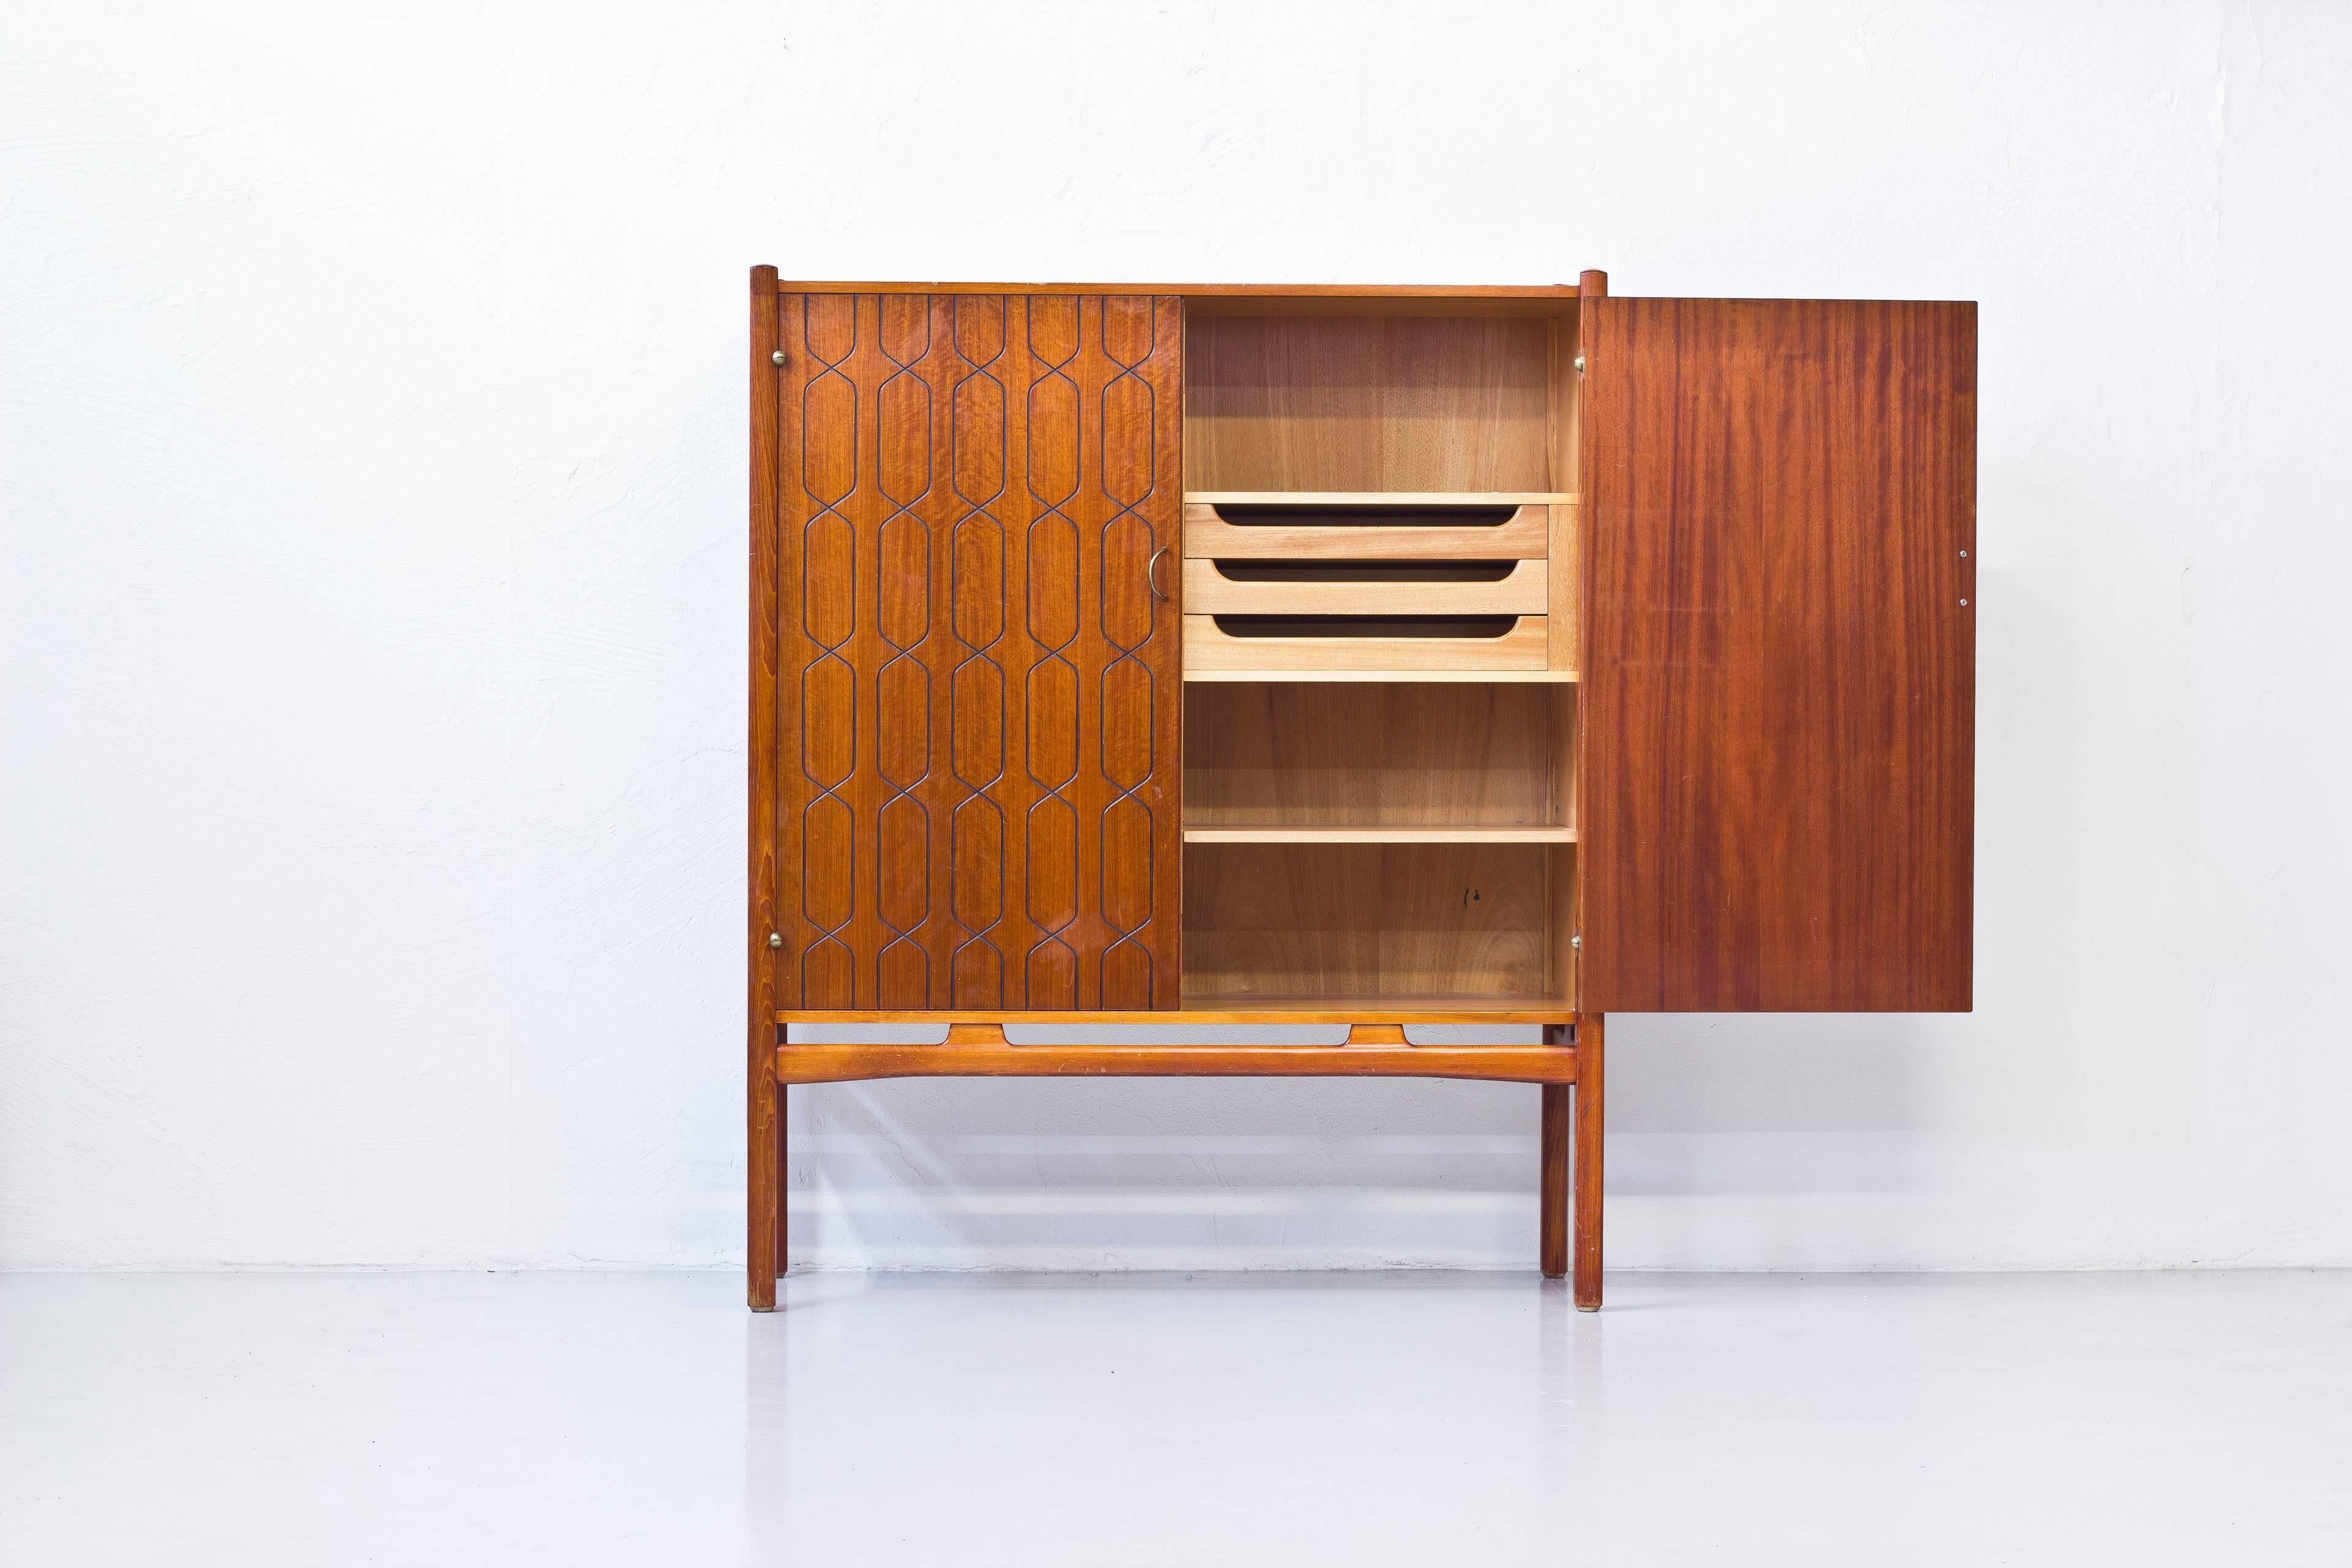 Cabinet designed by David Rosen. Produced in Sweden by Nordiska Kompaniet during the 1950s. Mahogany and beech wood with brass details. Adjustable shelves on the inside and three drawers. Very good condition with few signs of wear and light age